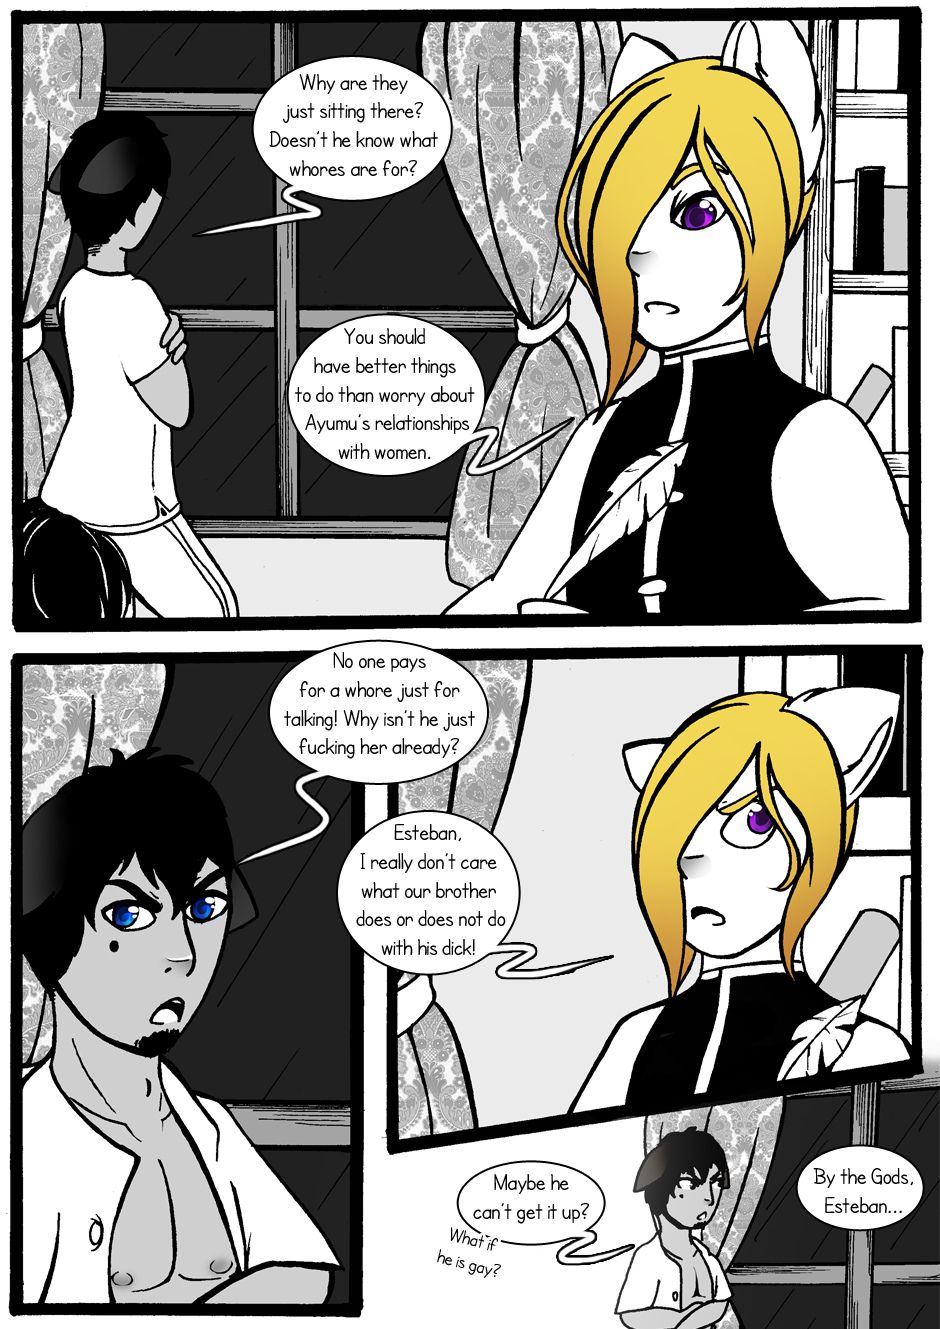 [Jeny-jen94] Between Kings and Queens [Ongoing] 61